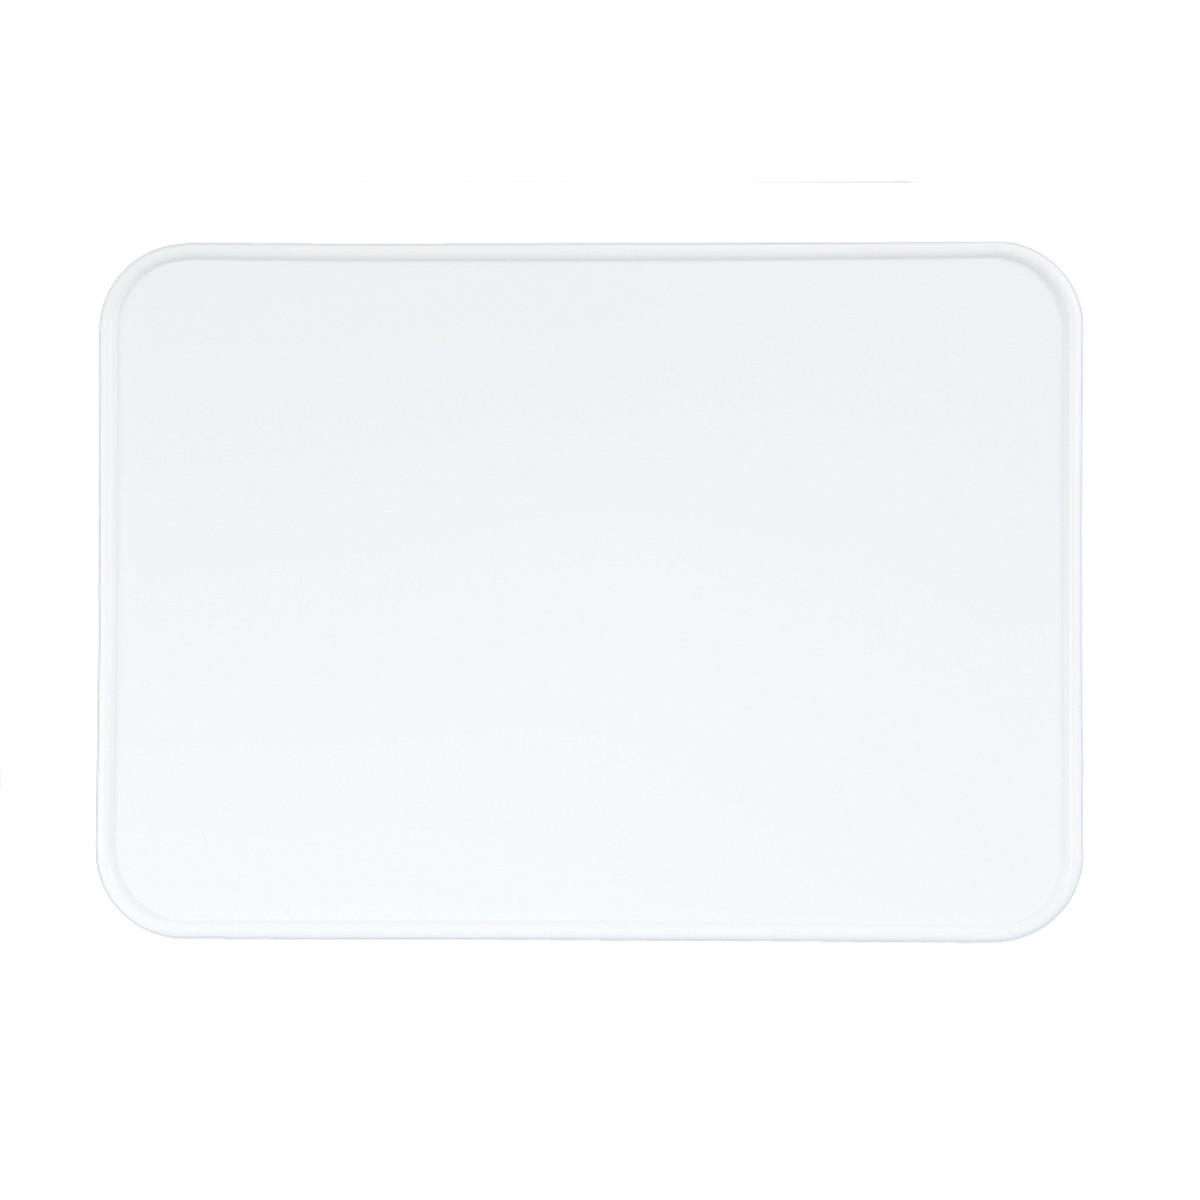 Maier Tabella Portanumero  Universal Number Plate, 18cm x 25cm, rectangle